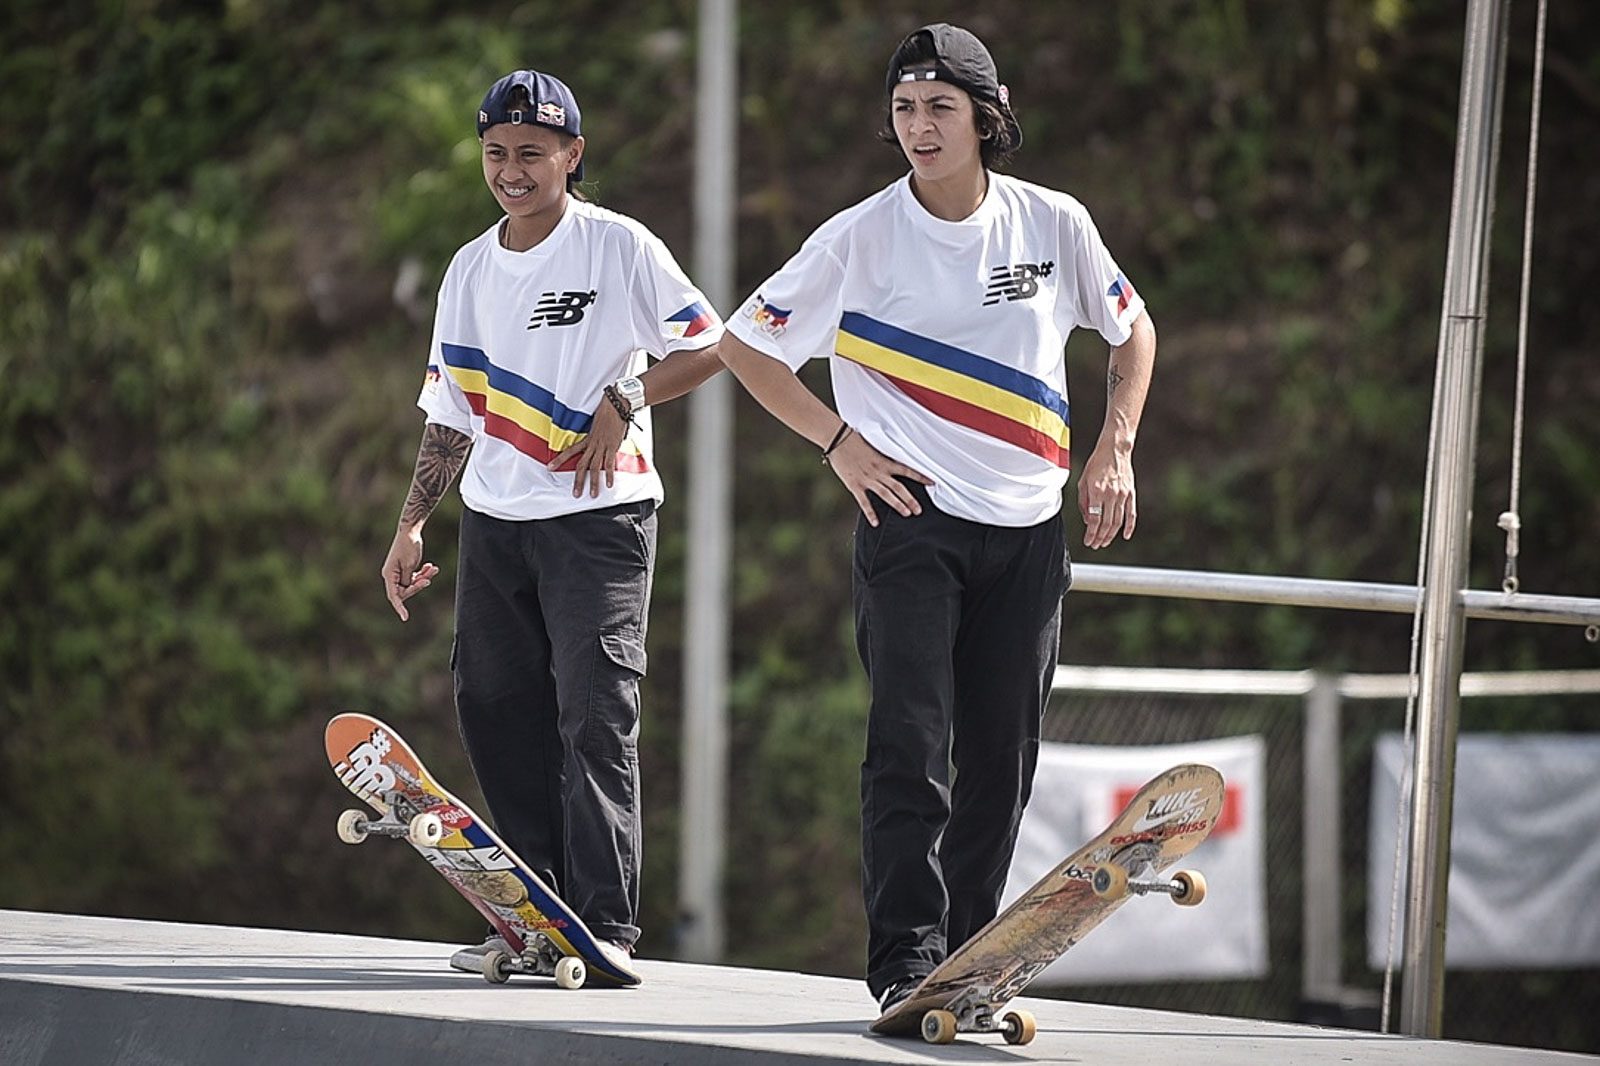 Didal, PH team call for more support, skate parks